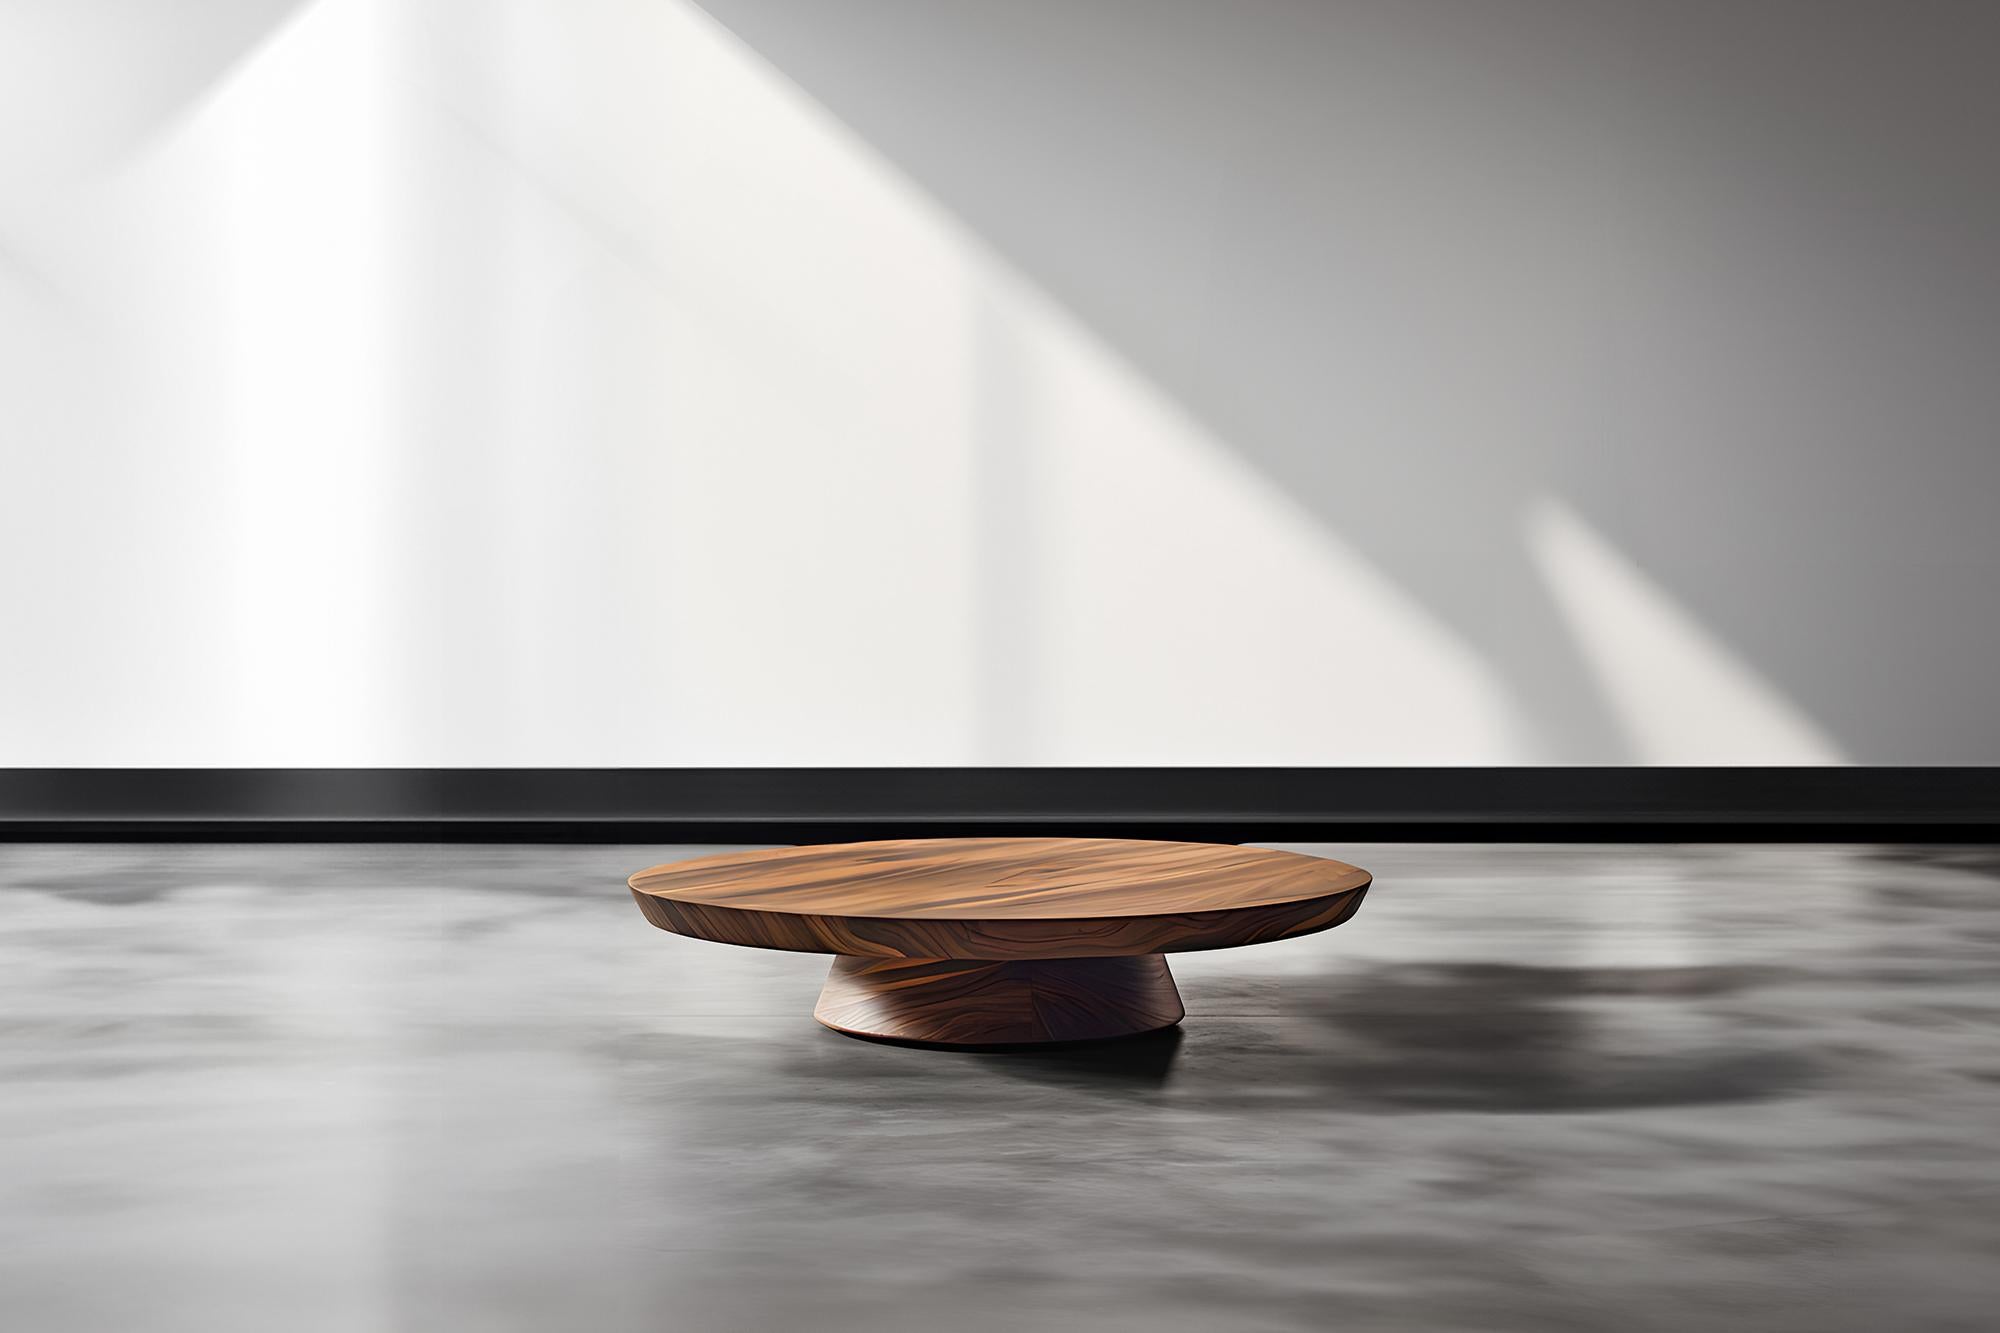 Sculptural Coffee Table Made of Solid Wood, Center Table Solace S48  by Joel Escalona


The Solace table series, designed by Joel Escalona, is a furniture collection that exudes balance and presence, thanks to its sensuous, dense, and irregular